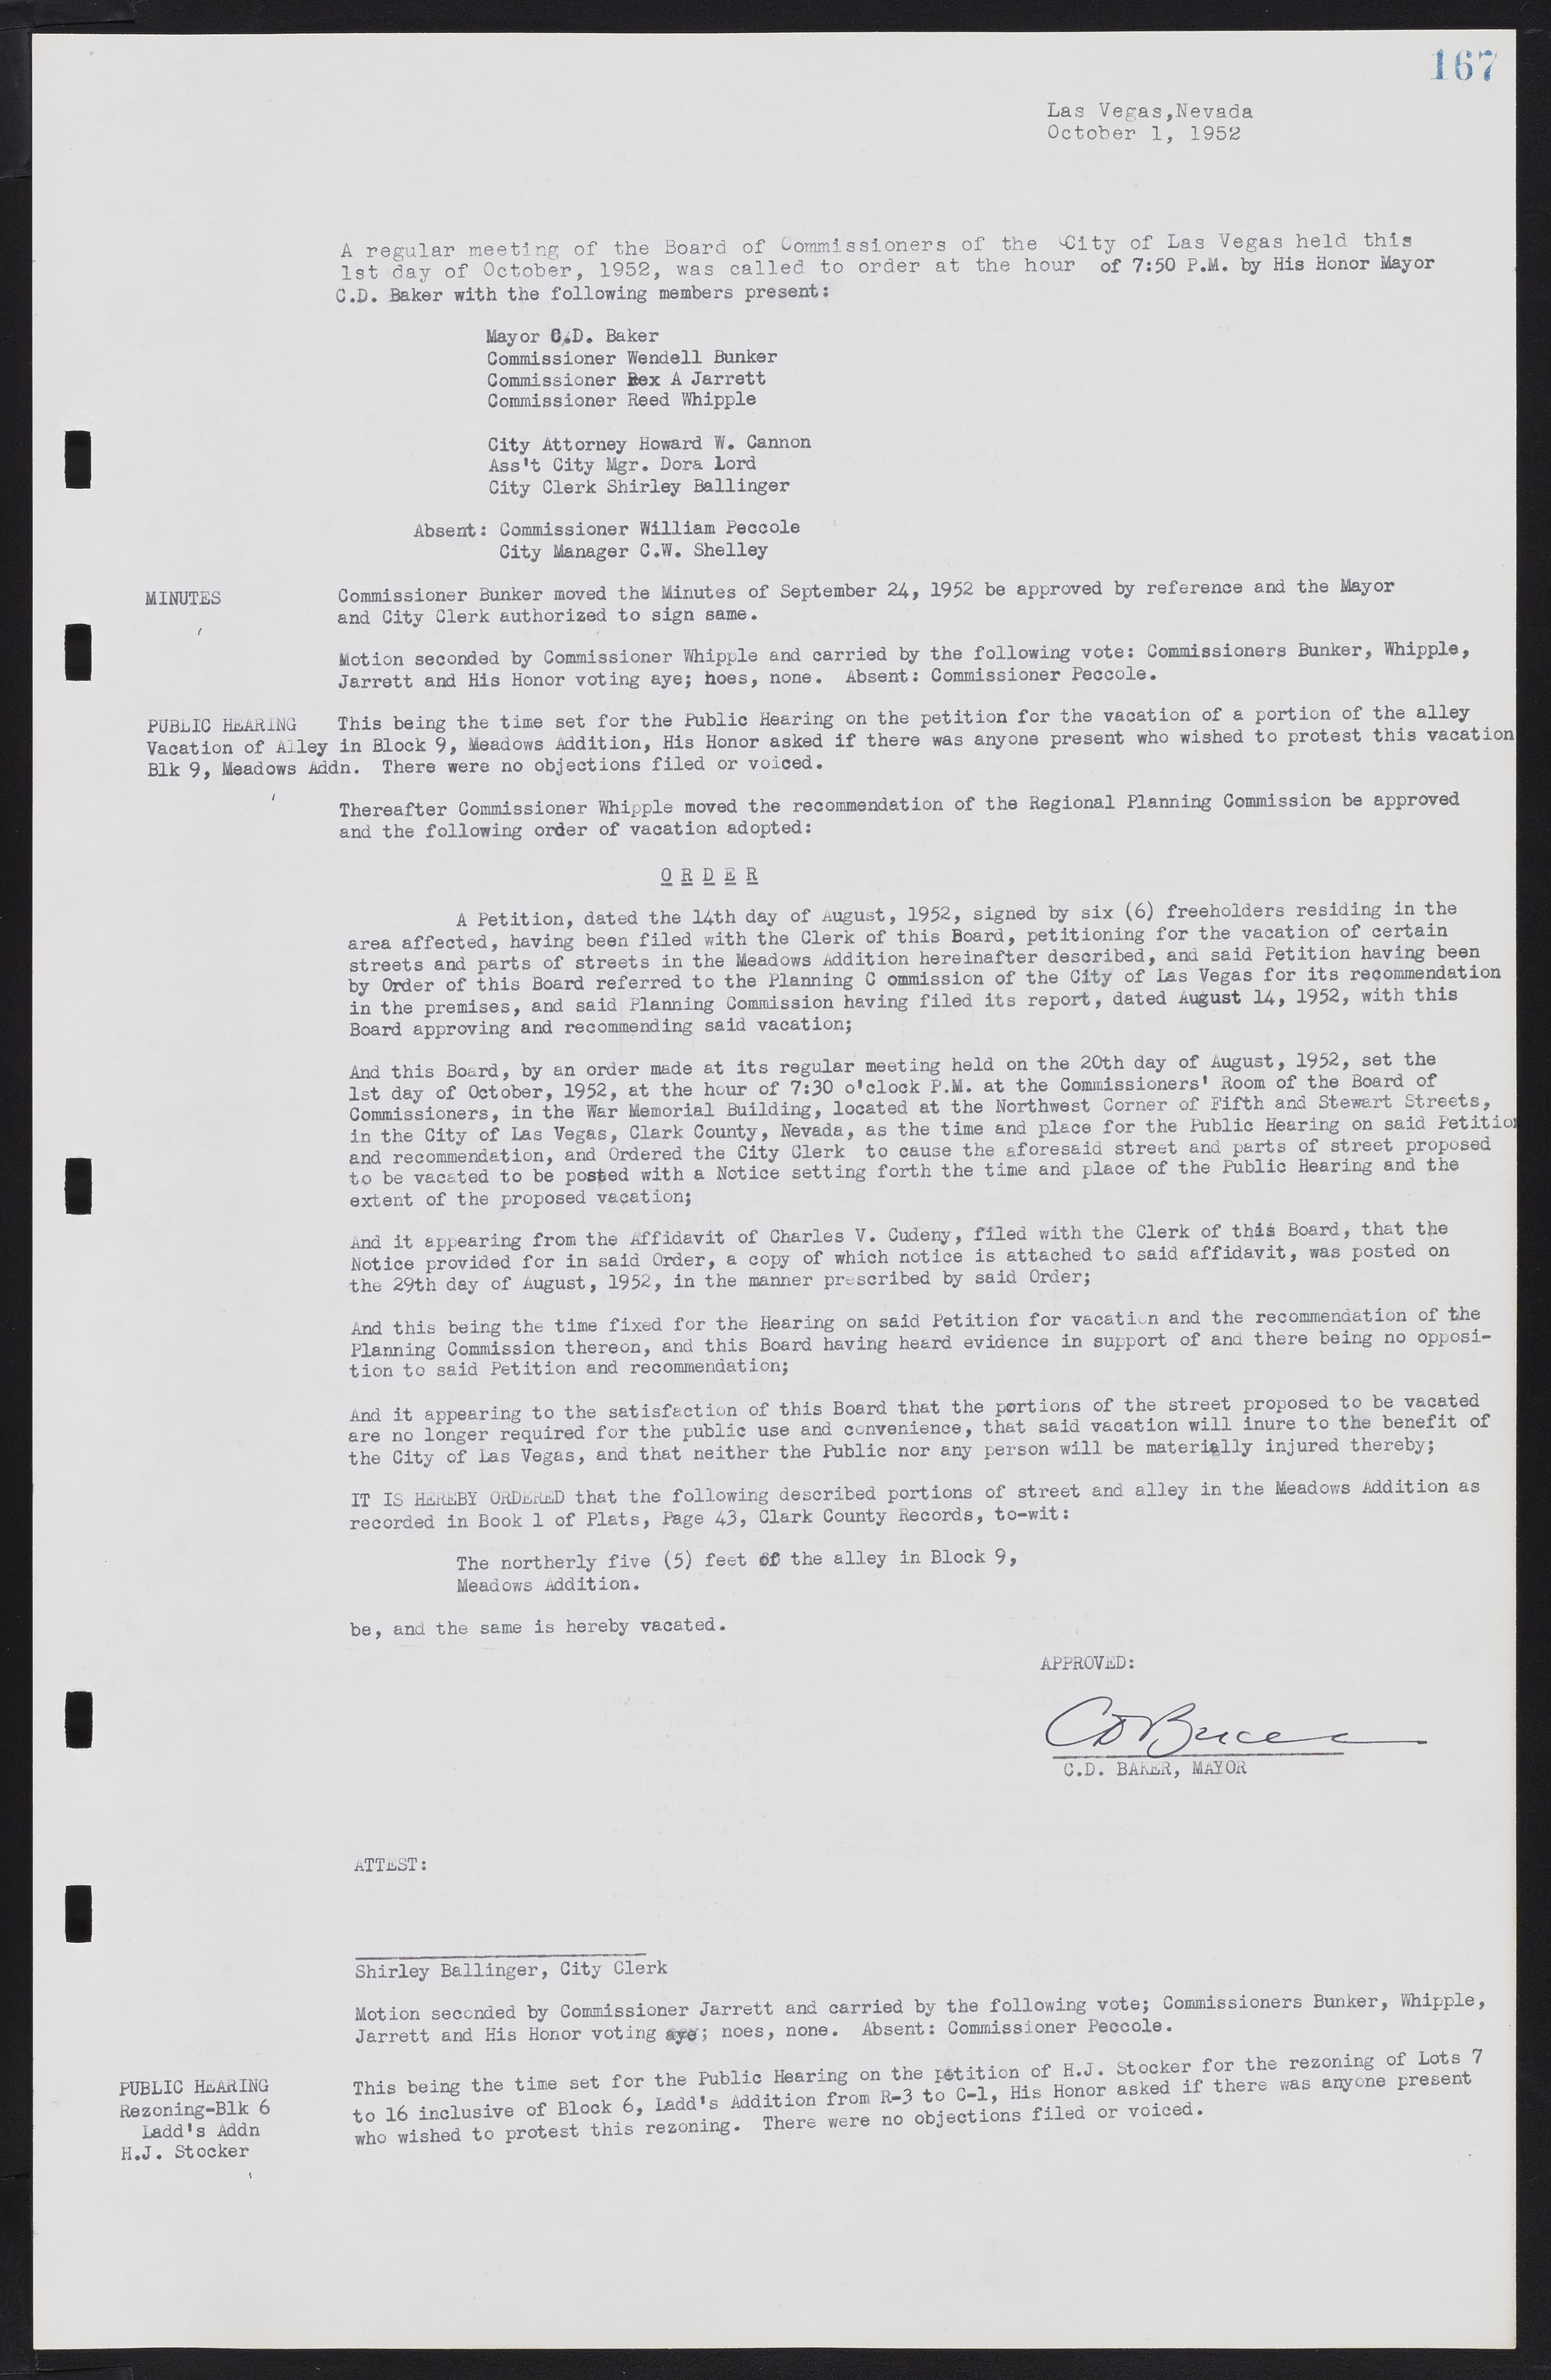 Las Vegas City Commission Minutes, May 26, 1952 to February 17, 1954, lvc000008-181